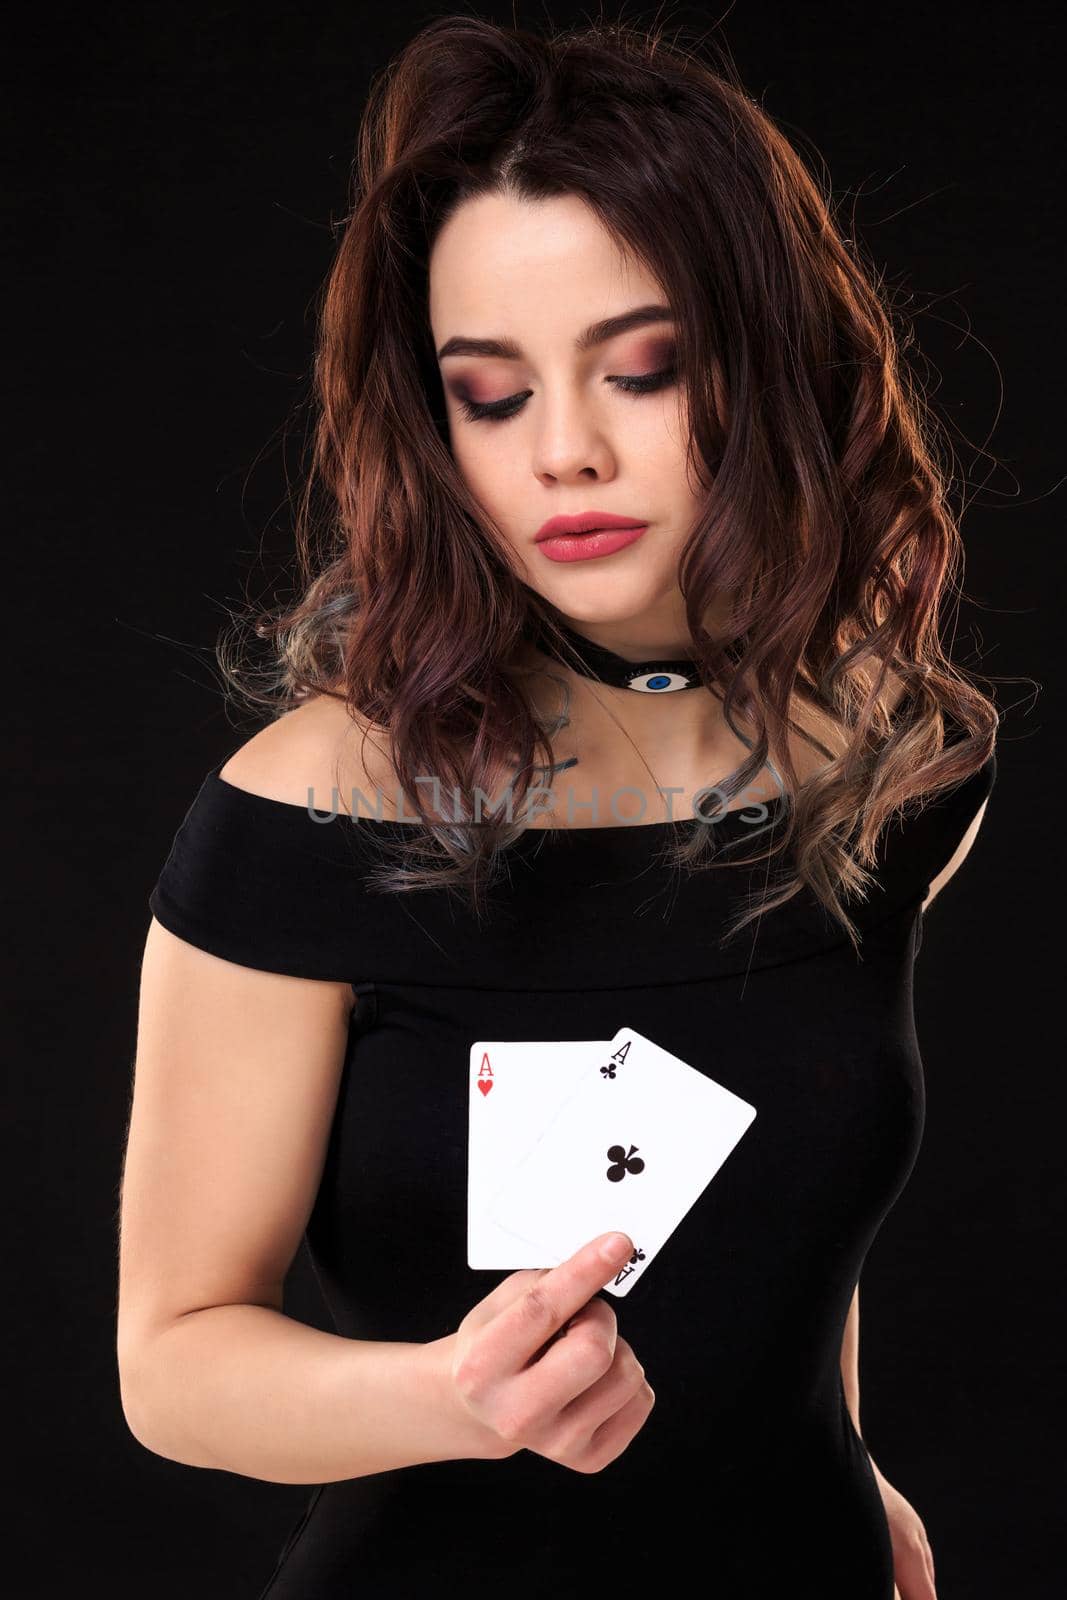 Young woman holding playing cards against a black background. Gambling. Poker. Two Aces.